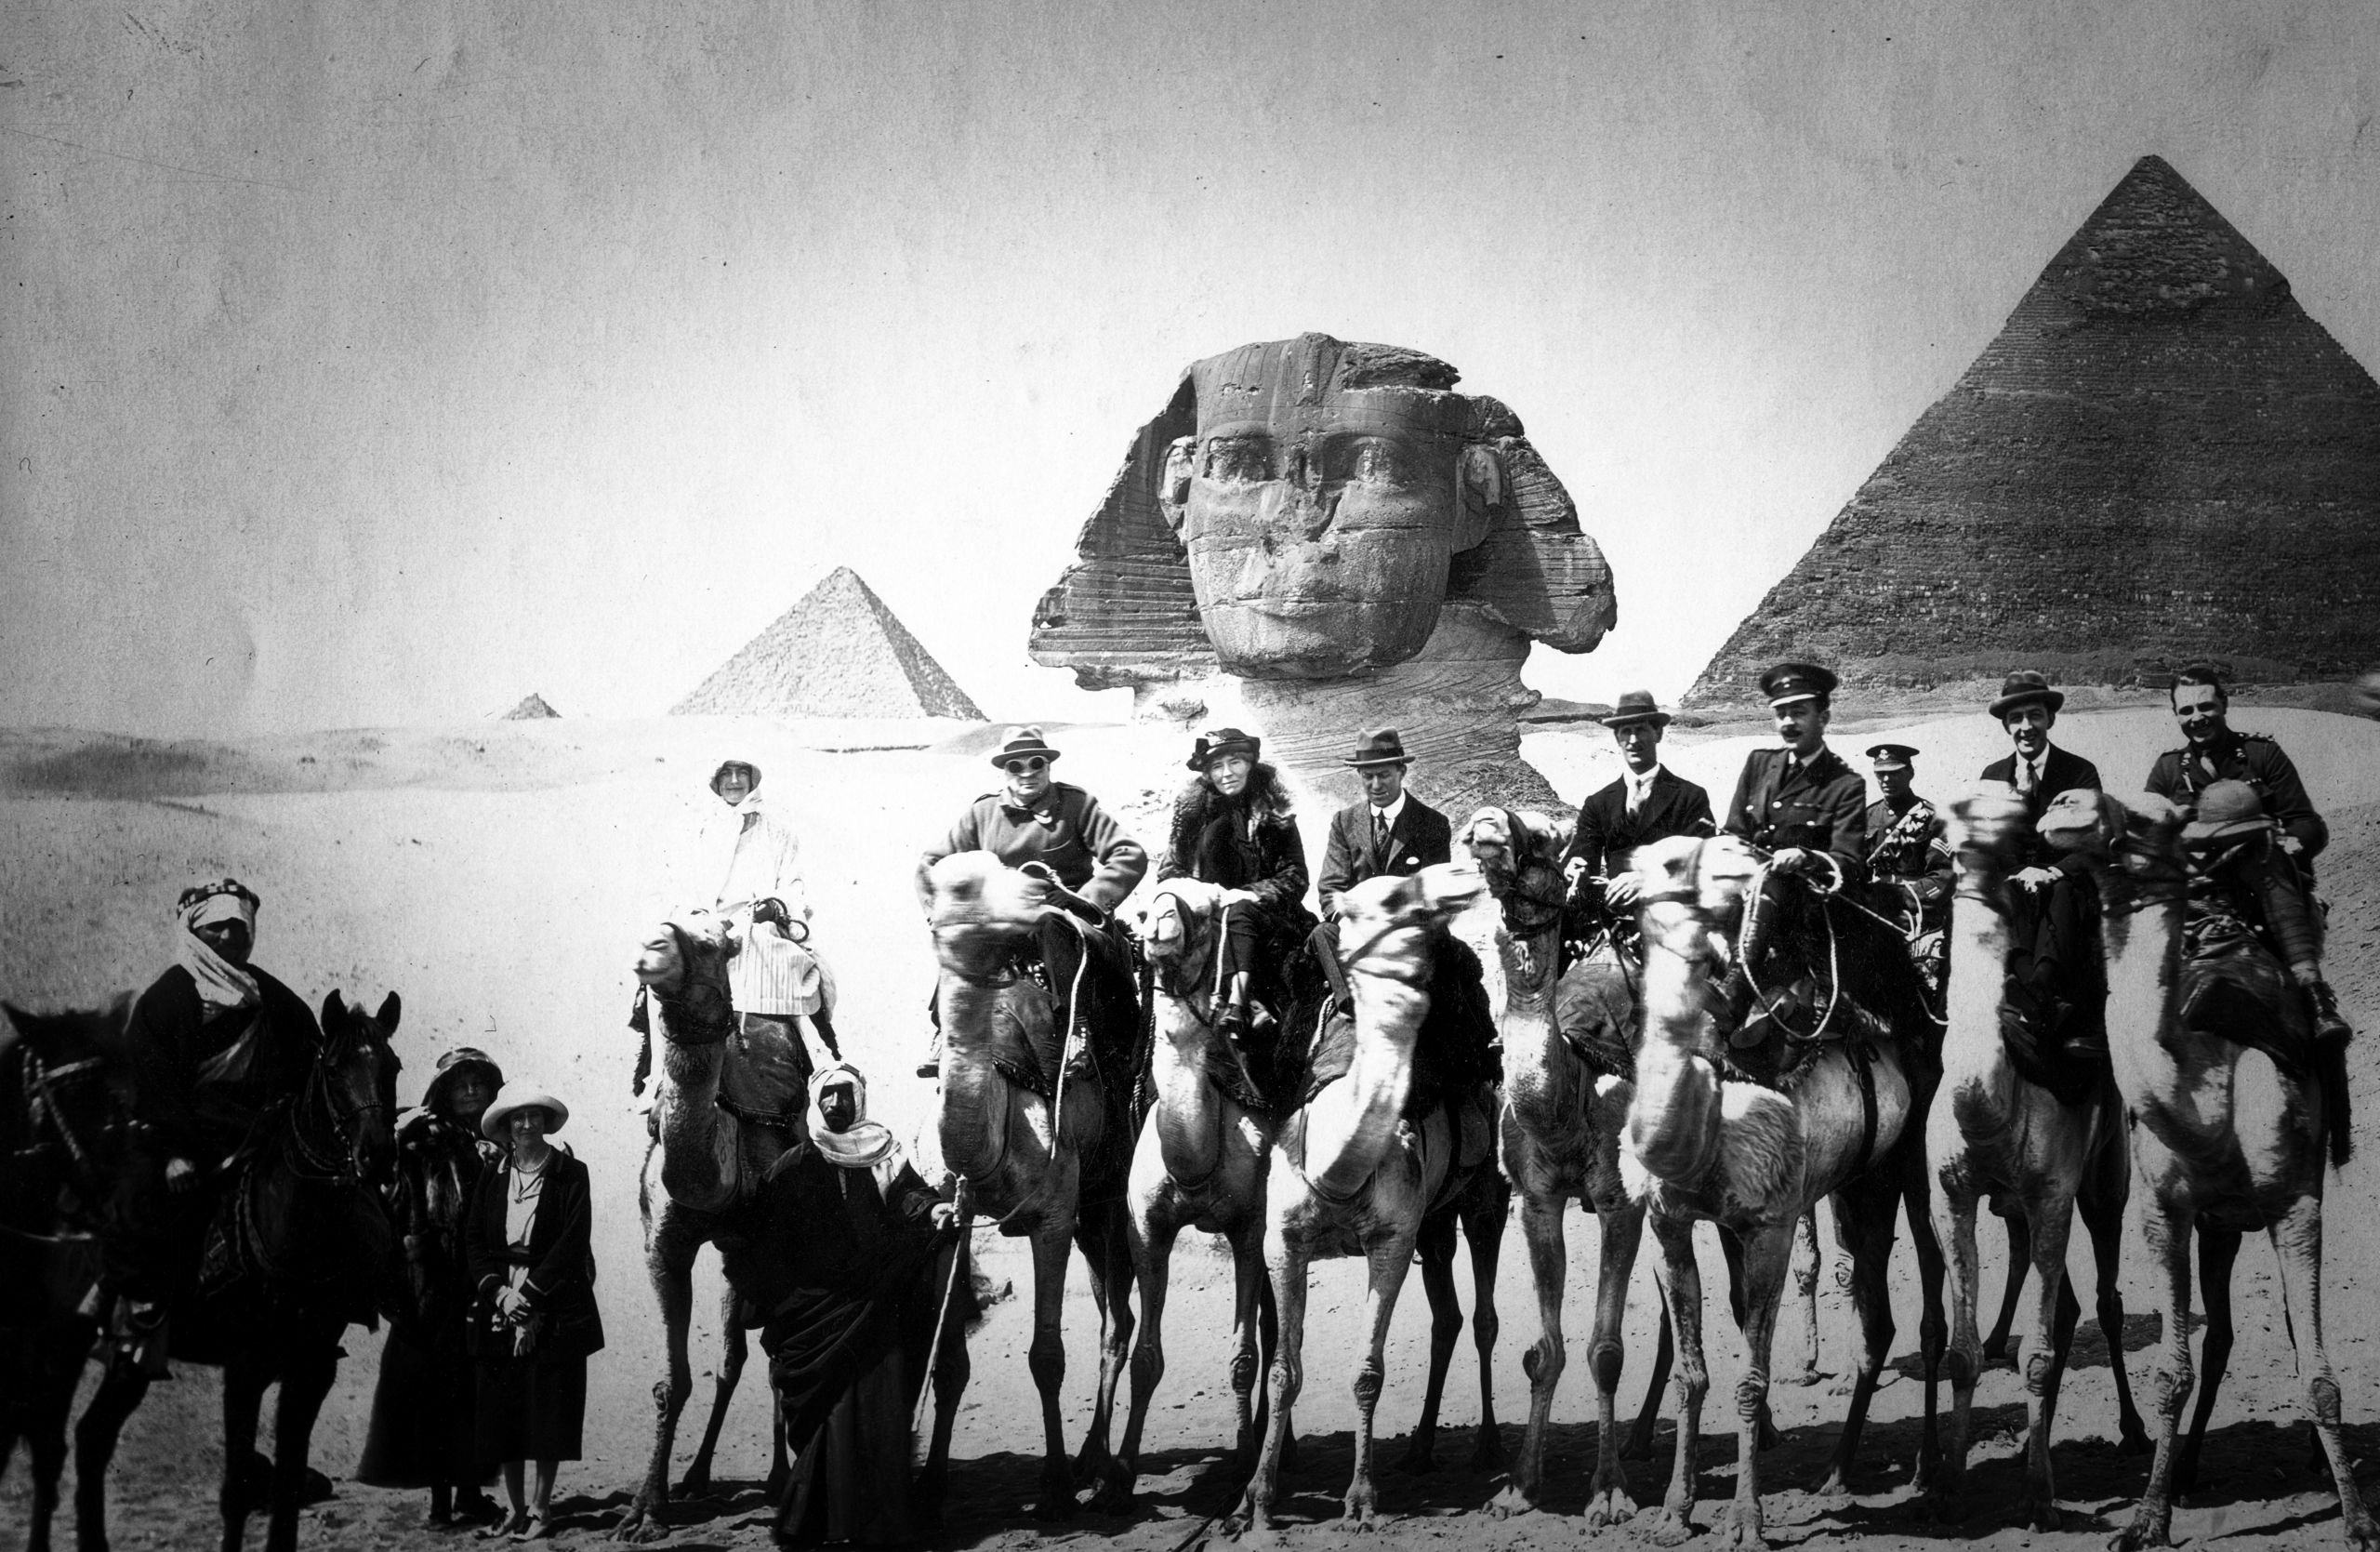 Gertrude Bell among high ranking officials in front of the pyramids and sphinx. 